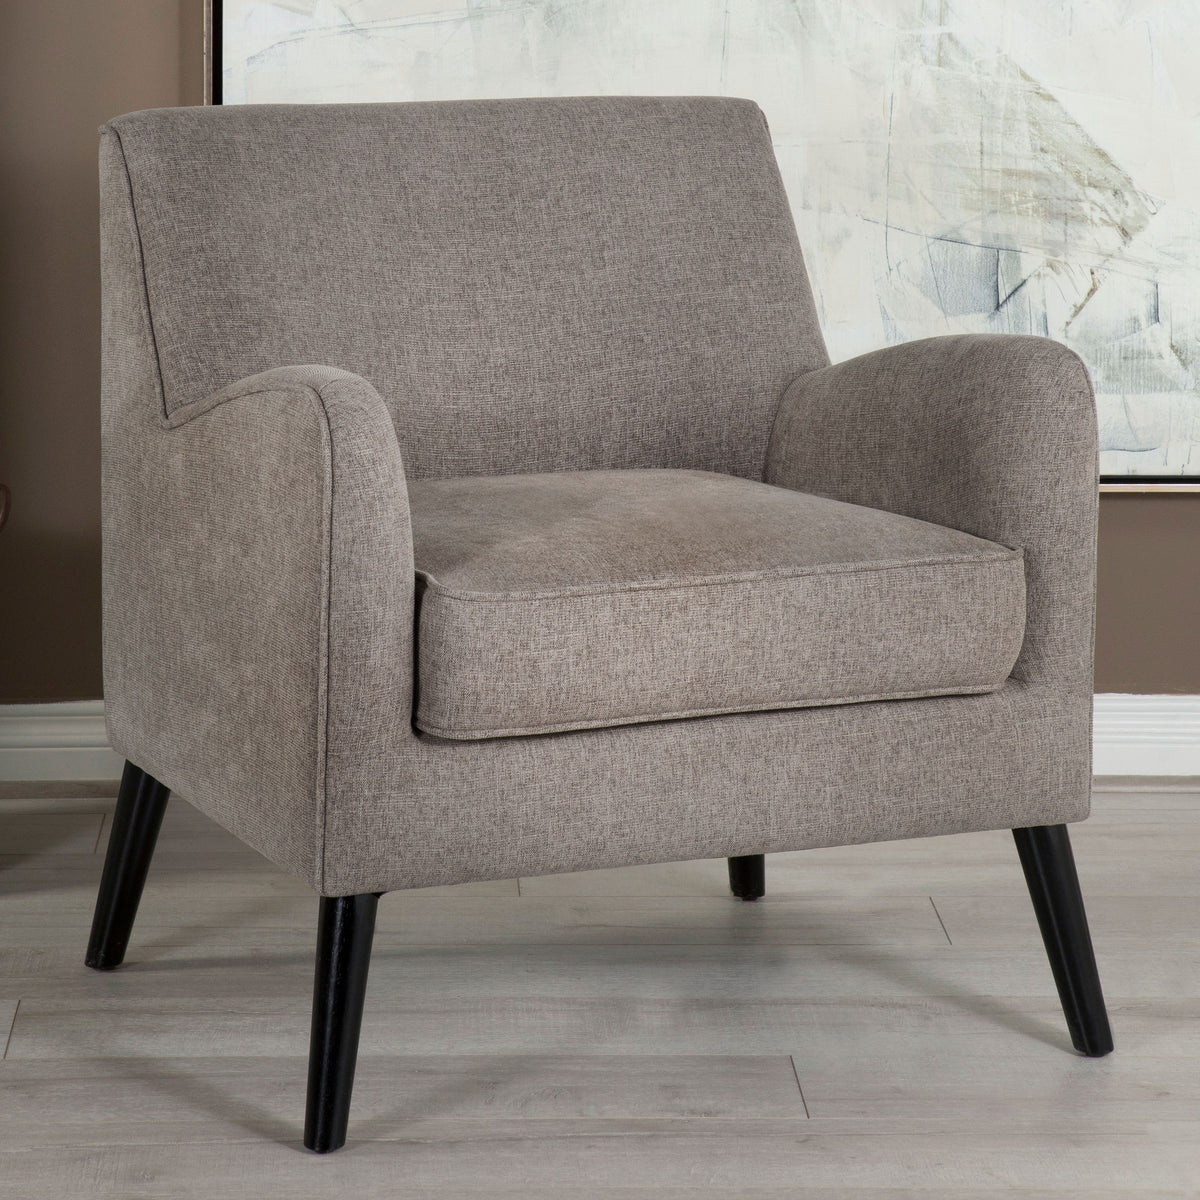 Charlie Upholstered Accent Chair with Reversible Seat Cushion Charlie Upholstered Accent Chair with Reversible Seat Cushion Half Price Furniture